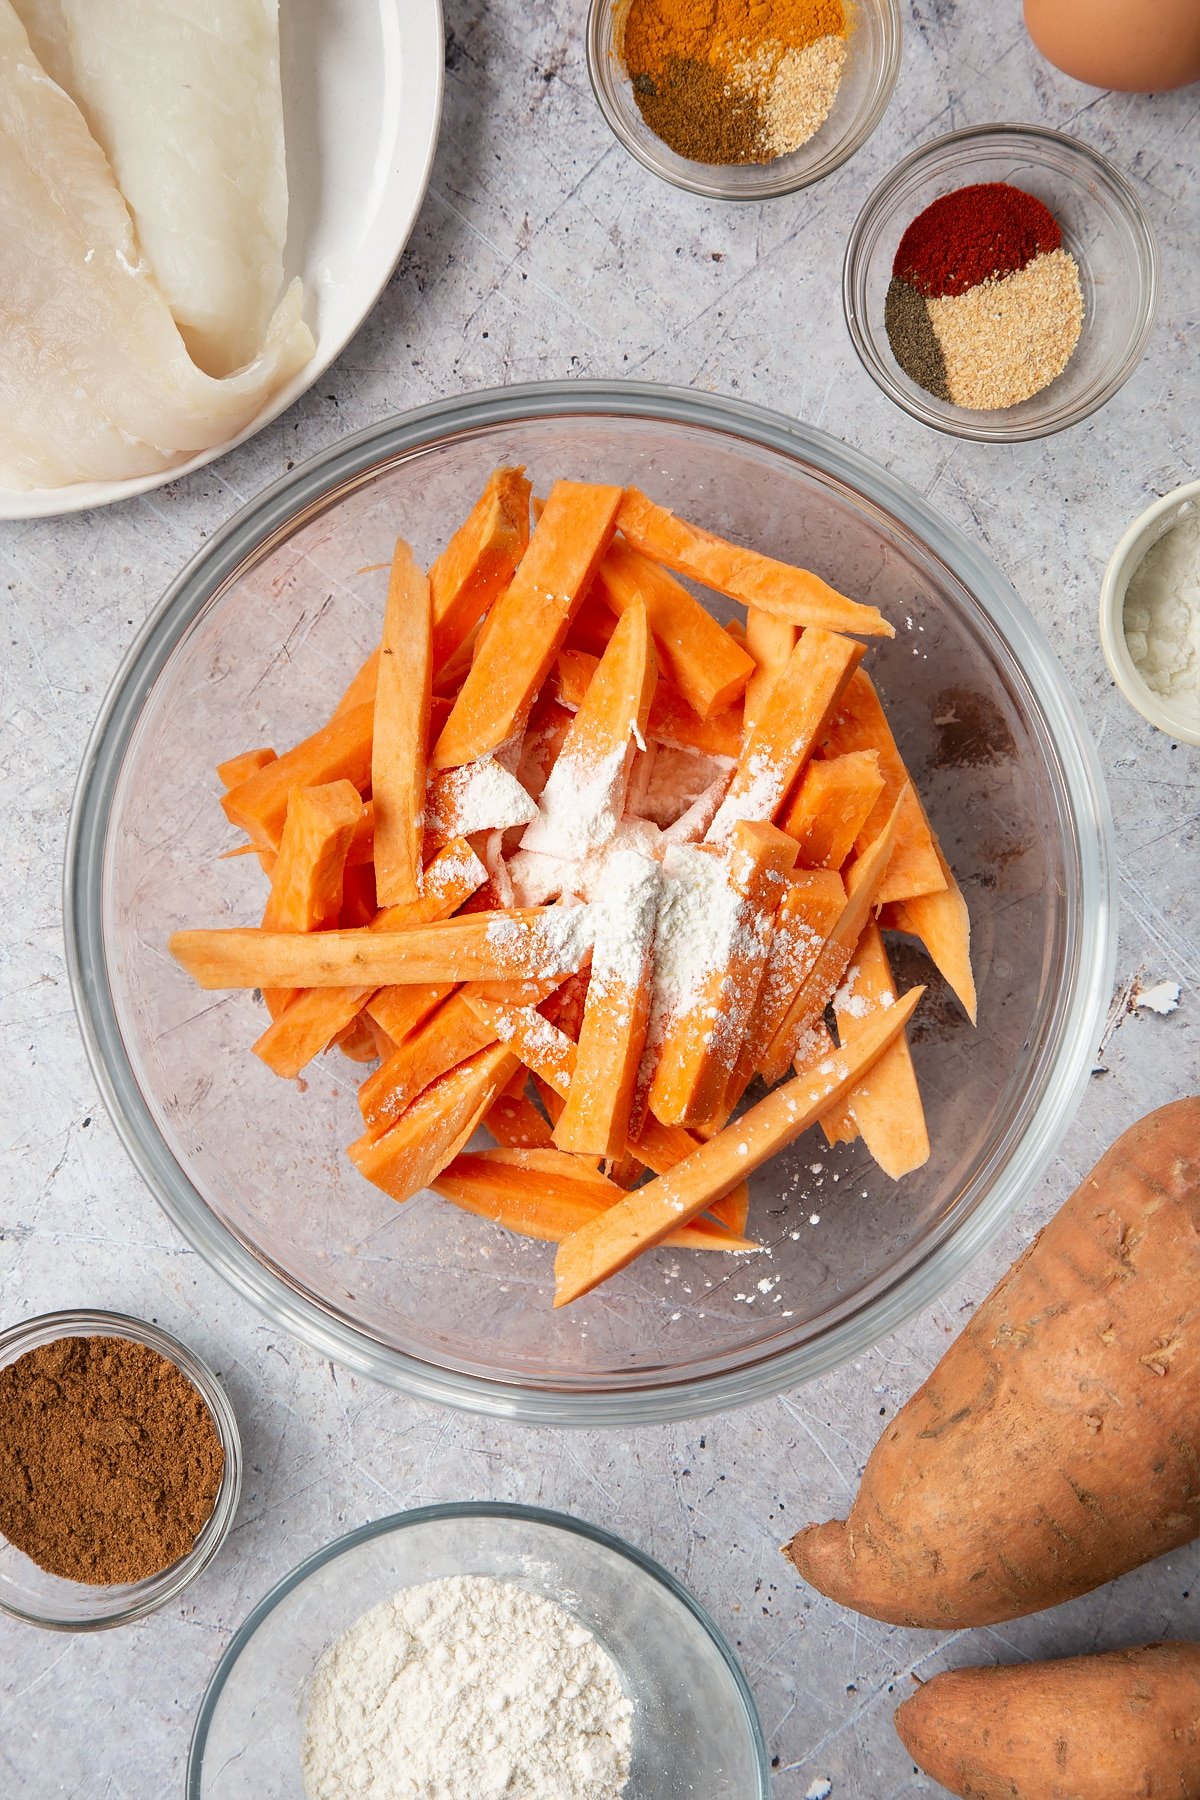 Sweet potato cut into fries and placed in a glass bowl, topped with cornflour. Surrounding the bowl is ingredients for sweet potato chips.